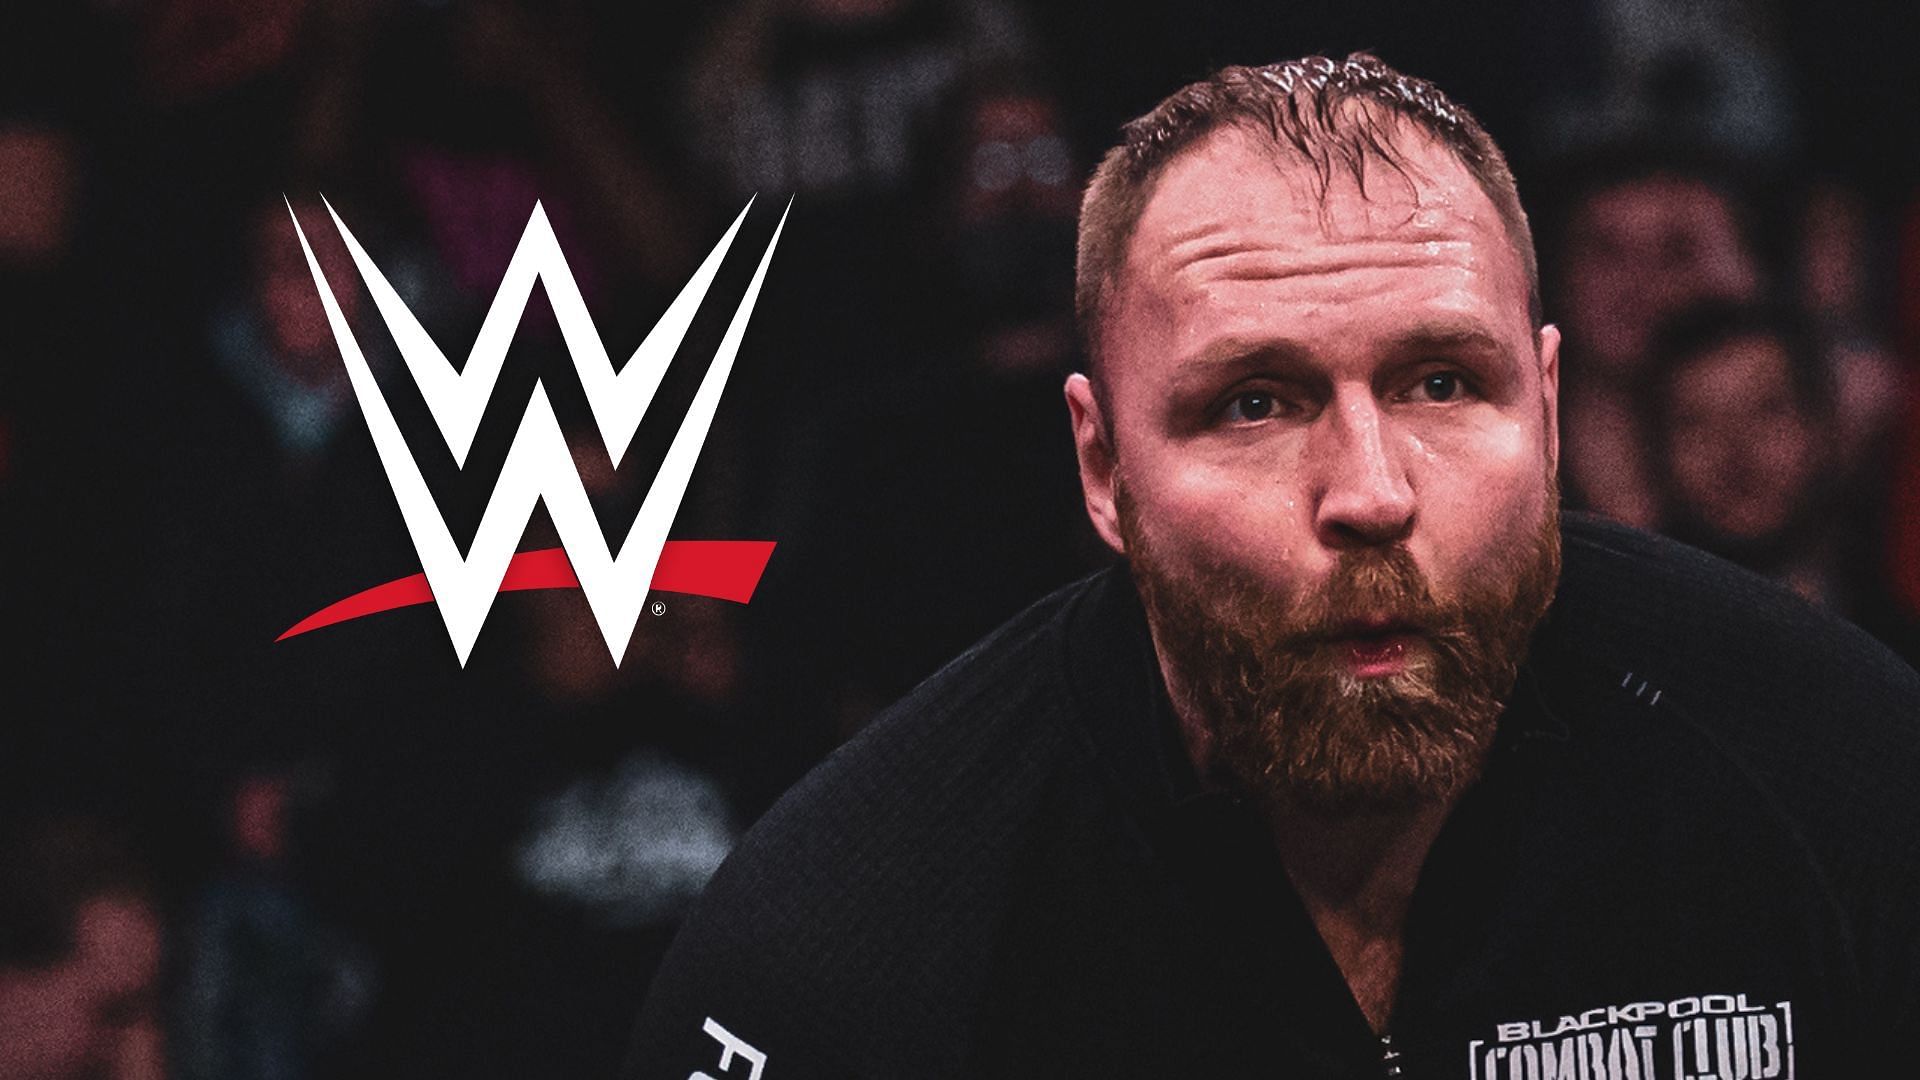 Jon Moxley thought he was good, until he got in the ring with a WWE legend